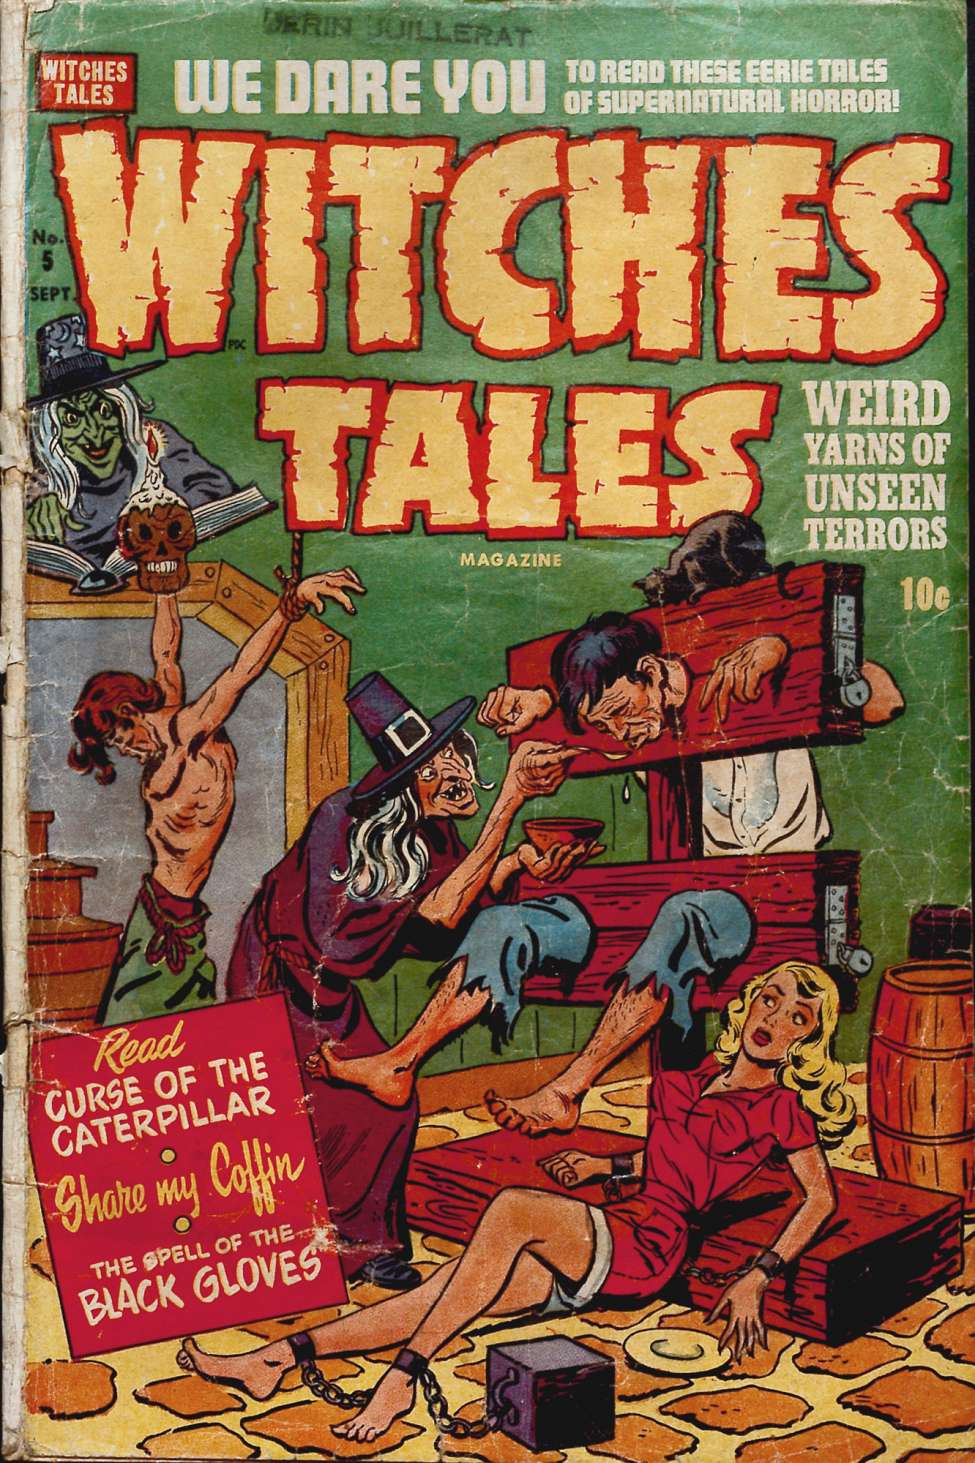 Book Cover For Witches Tales 5 (alt) - Version 2